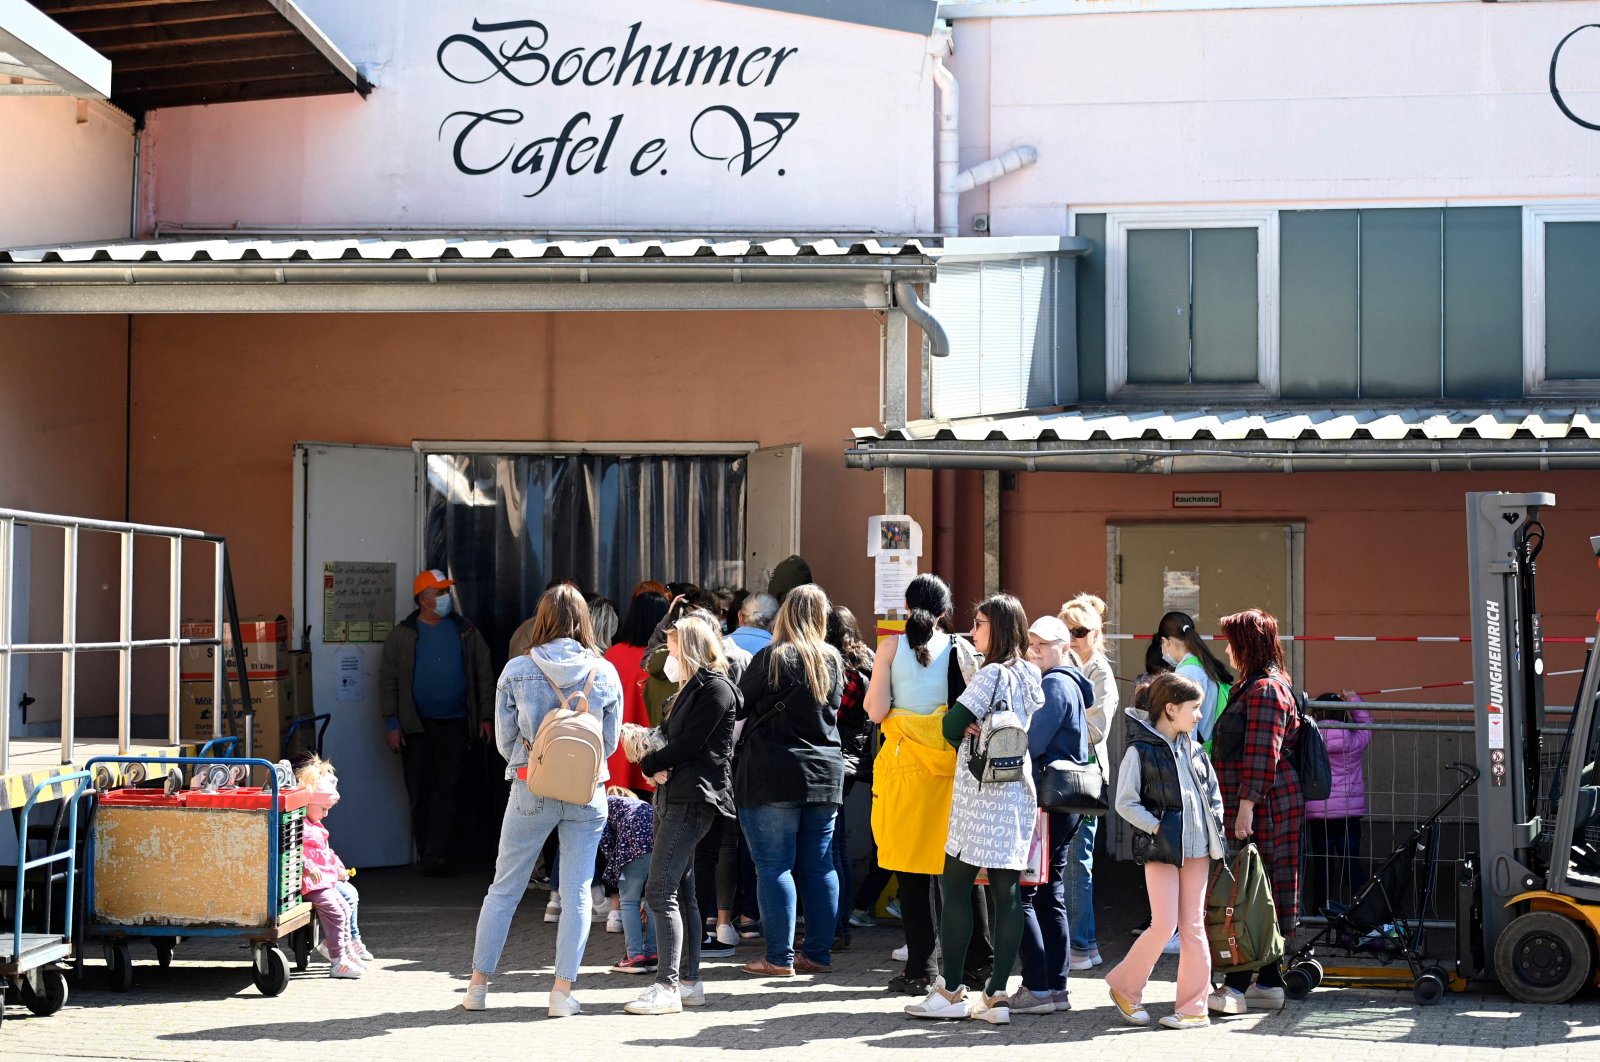 Refugee women and children from Ukraine queue for food at the Wattenscheider Tafel in Bochum, western Germany, April 20, 2022. (AFP Photo)